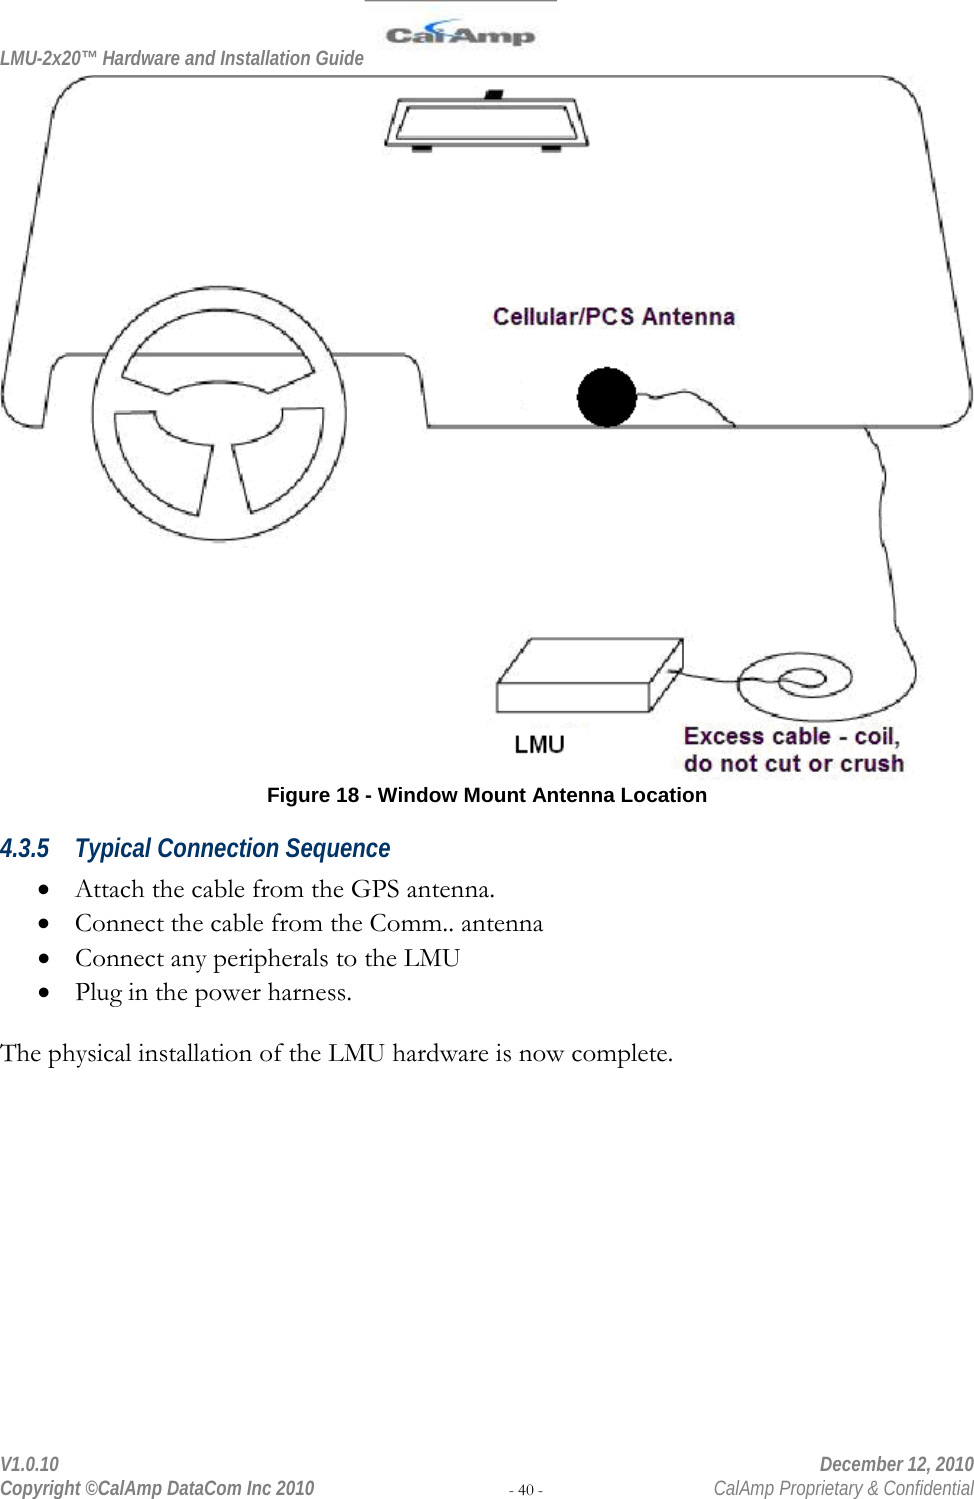 LMU-2x20™ Hardware and Installation Guide  V1.0.10    December 12, 2010 Copyright ©CalAmp DataCom Inc 2010 - 40 -  CalAmp Proprietary &amp; Confidential  Figure 18 - Window Mount Antenna Location 4.3.5 Typical Connection Sequence • Attach the cable from the GPS antenna. • Connect the cable from the Comm.. antenna • Connect any peripherals to the LMU • Plug in the power harness.  The physical installation of the LMU hardware is now complete. 